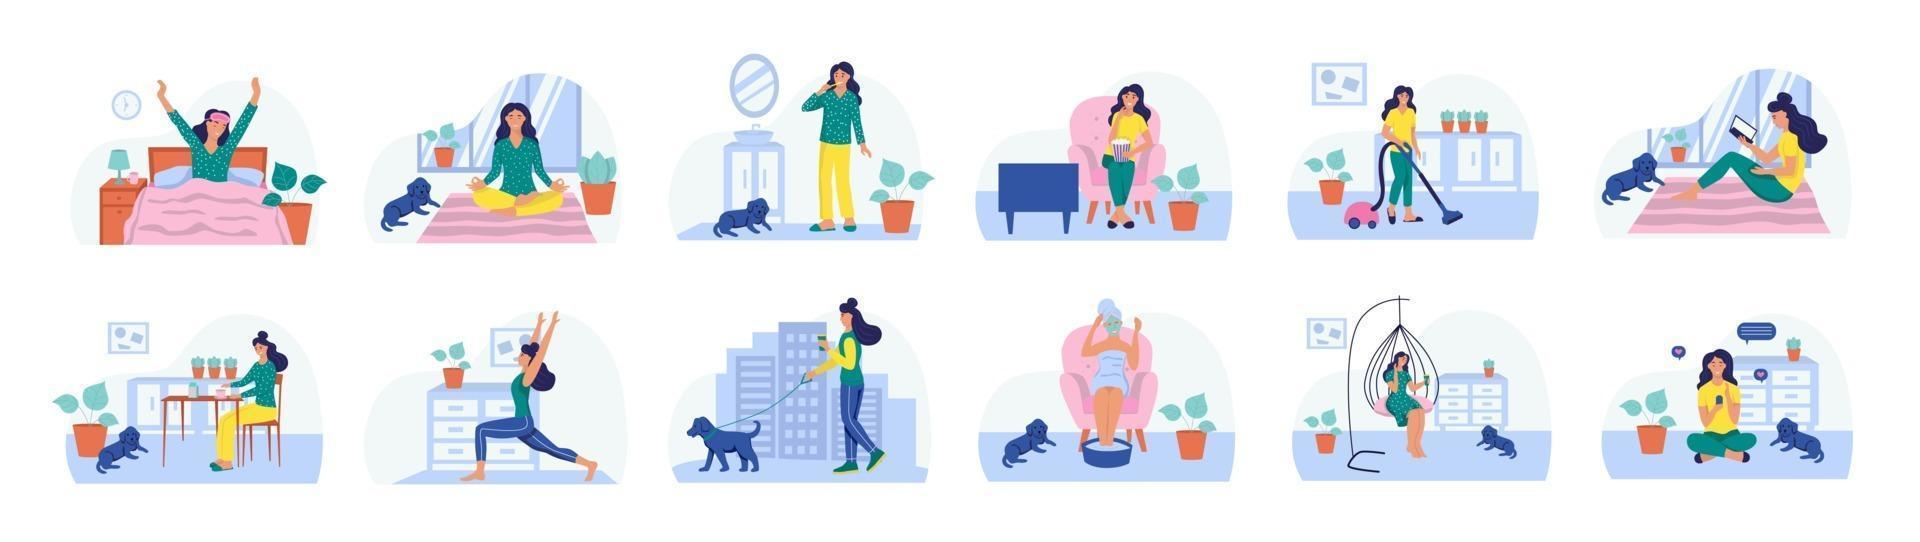 Set of daily routines. The concept of daily life, everyday leisure and work activities. Flat vector illustration.